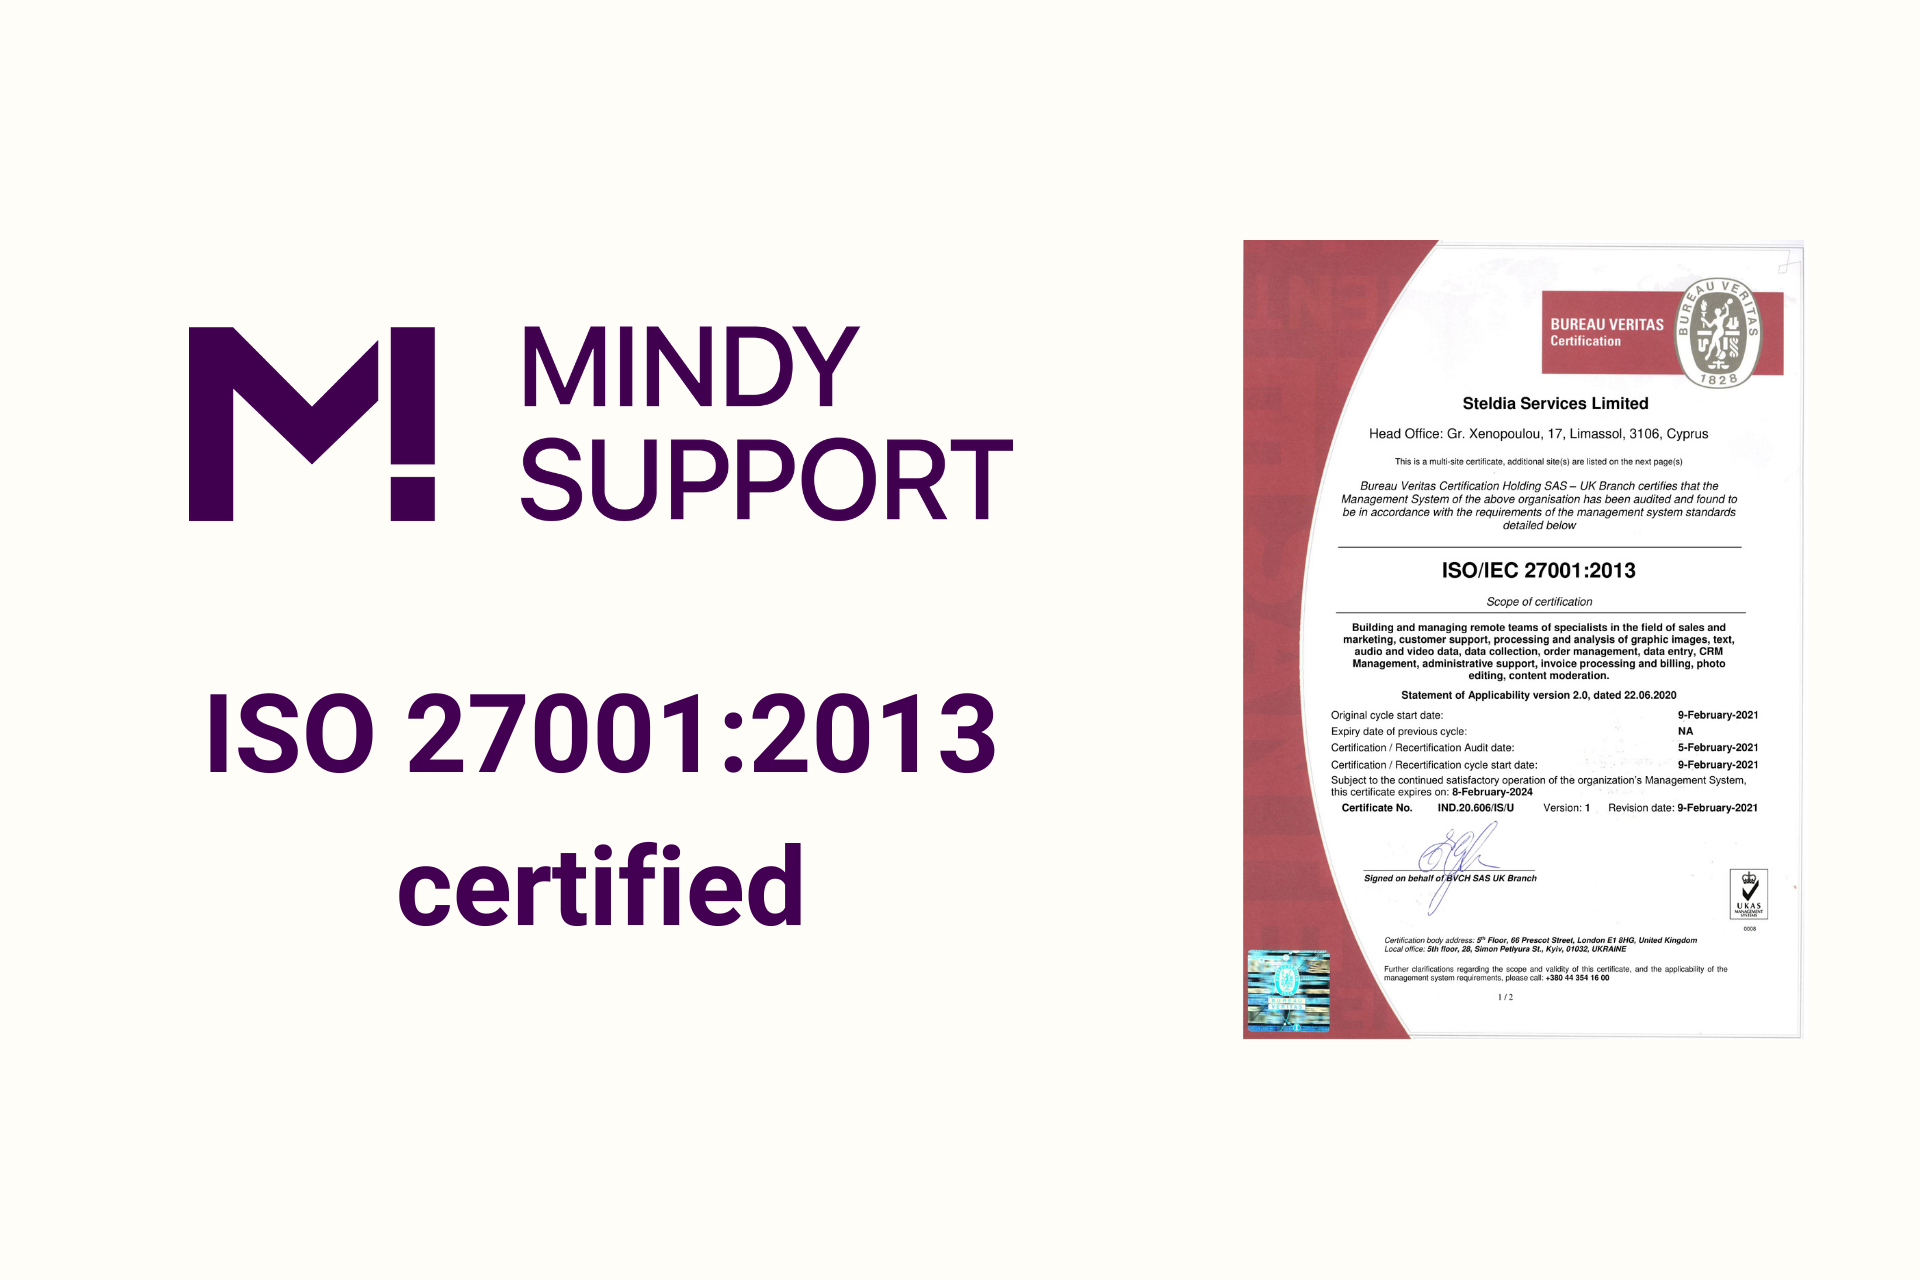 <Mindy Support